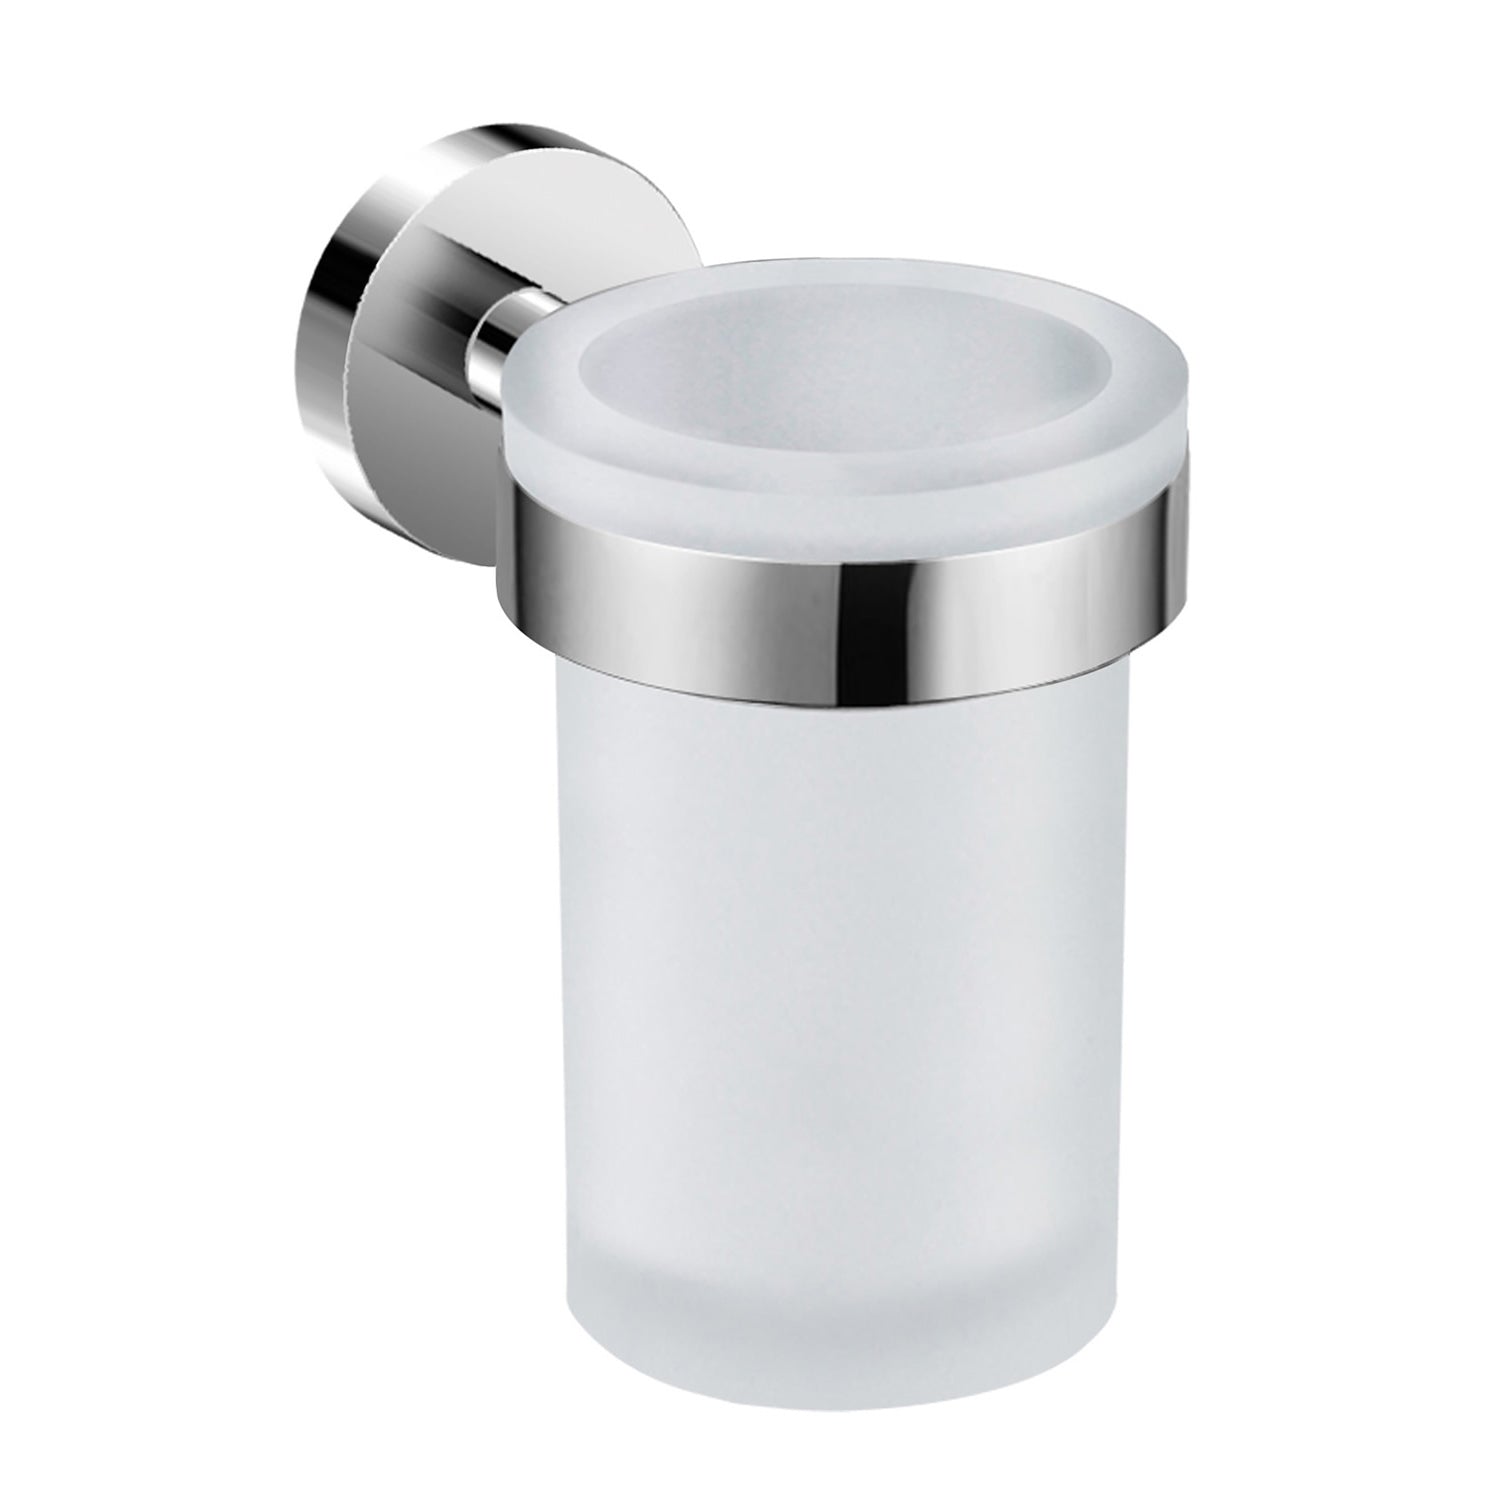 DAX Valencia Bathroom Single Tumbler Toothbrush Holder, Wall Mount, Tempered Glass Cup, Brushed Finish, 3 x 4-3/4 x 4-7/16 Inches (DAX-GDC120152-BN)